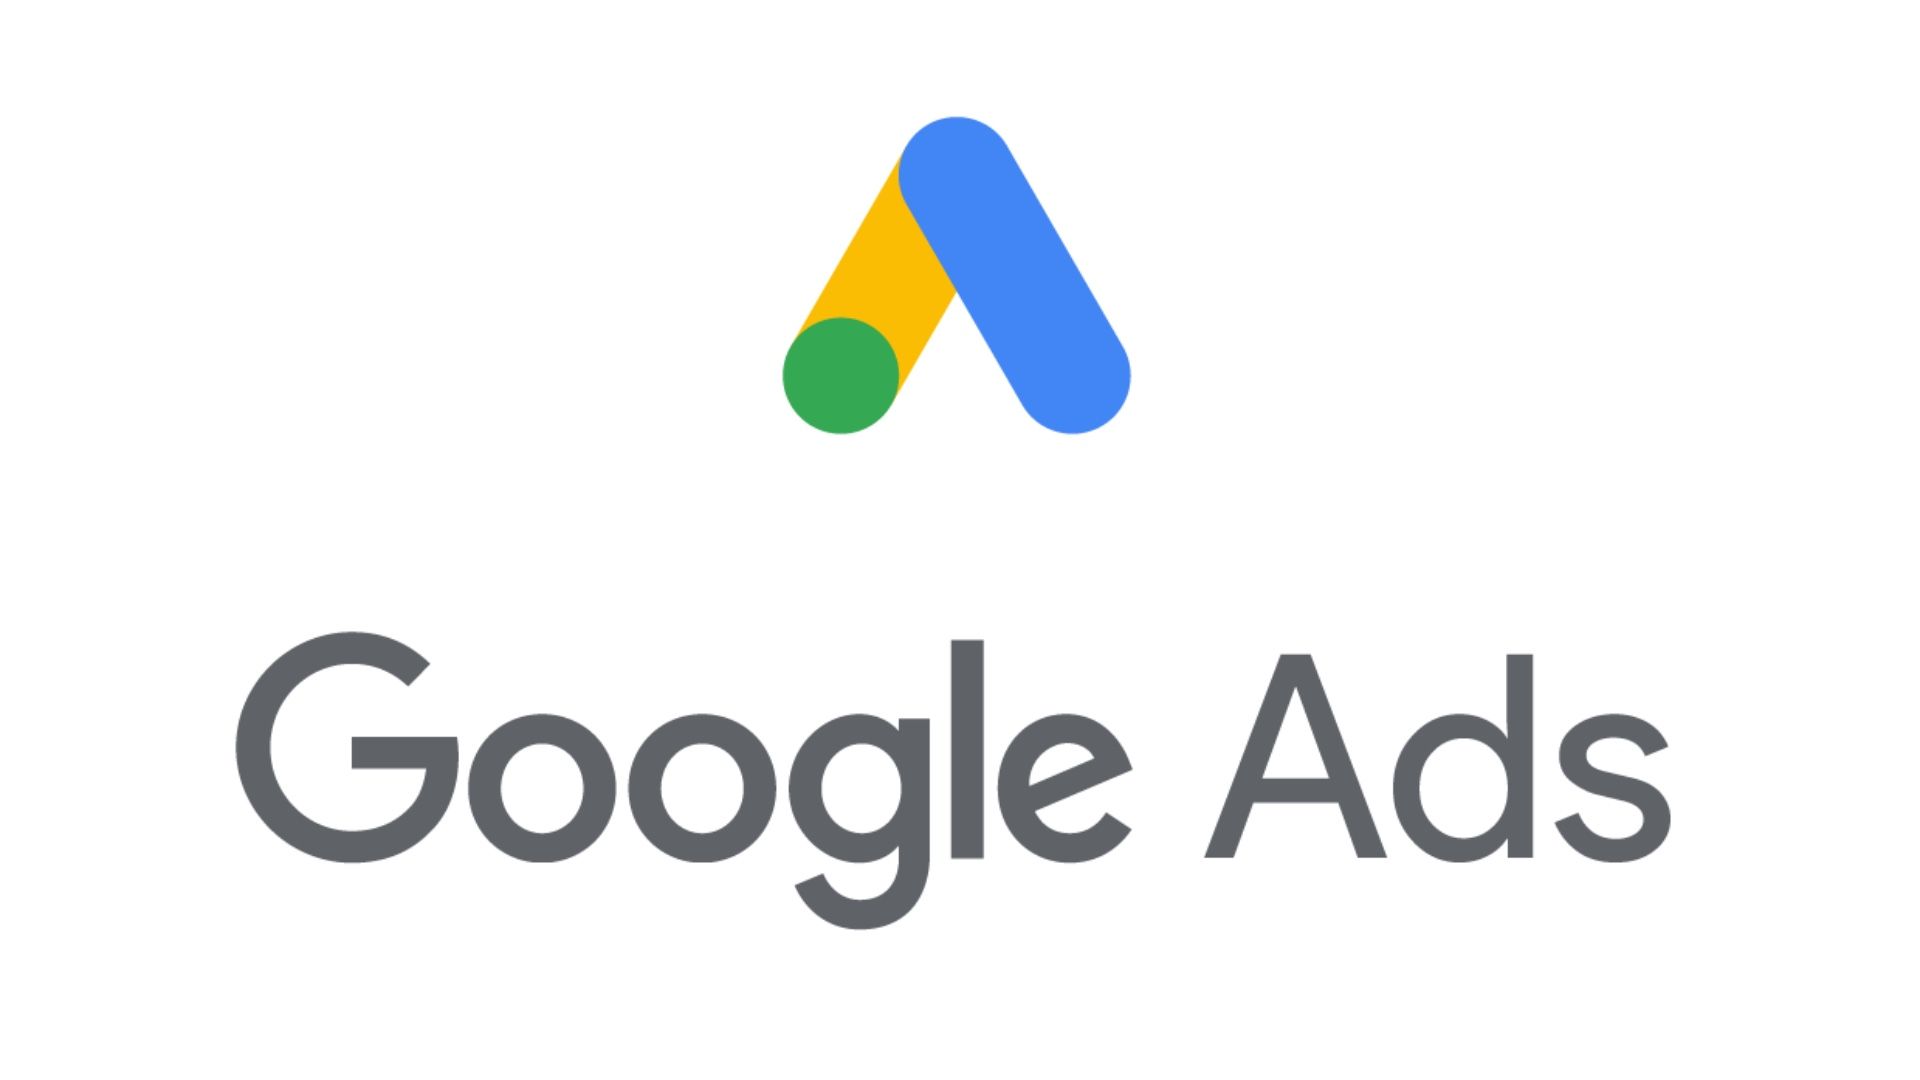 Google introduces new Data Exclusion controls for Smart Bidding in Google Ads